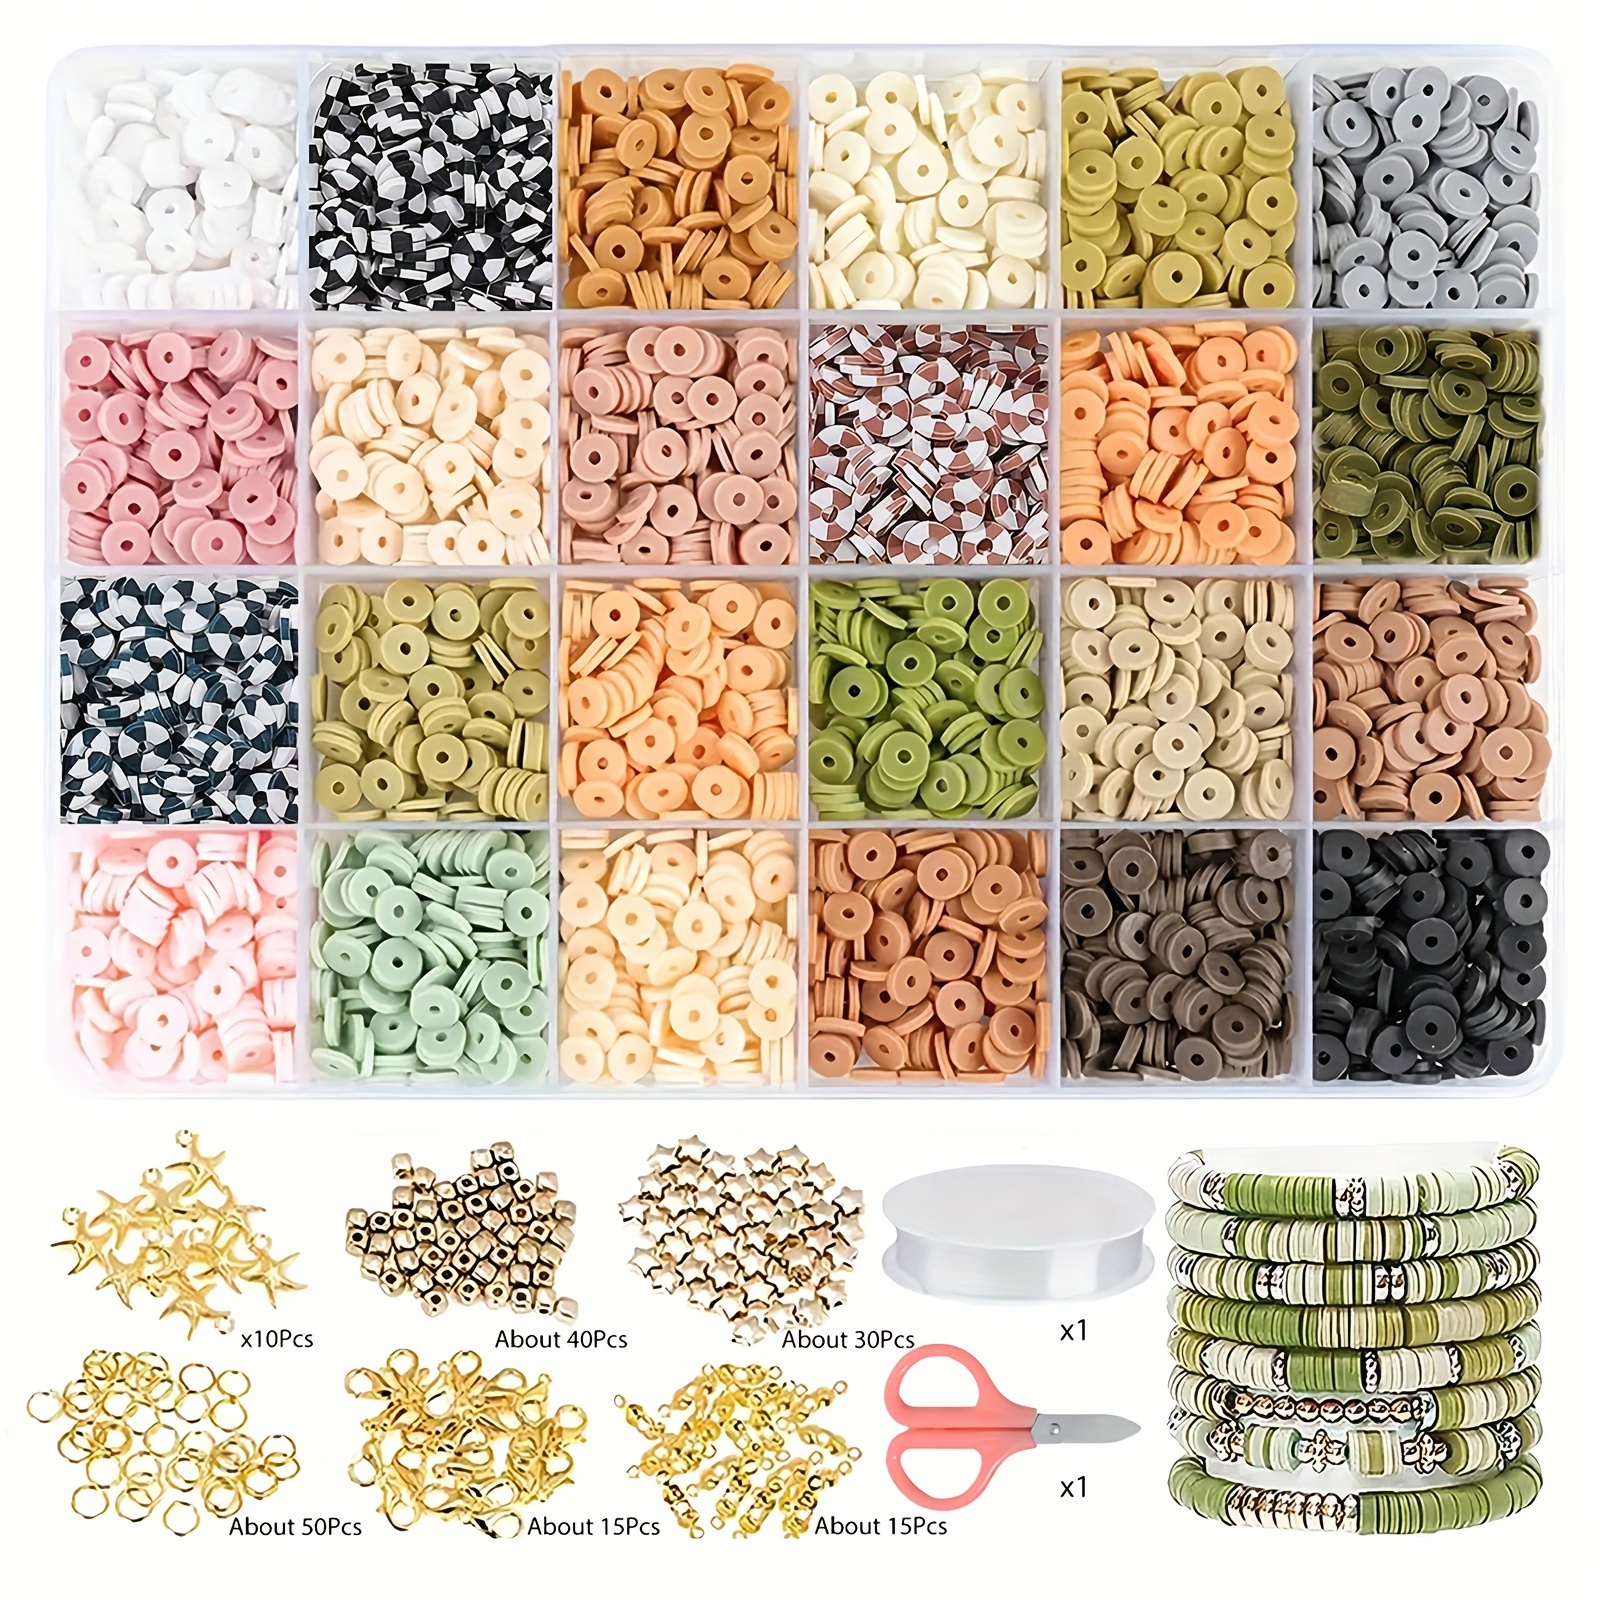 

2400pcs 24 Colors Polymer Clay Spacer Beads Beginner Set For Daily Use Diy Fashion Bracelet Necklace Jewelry Making Craft Supplies